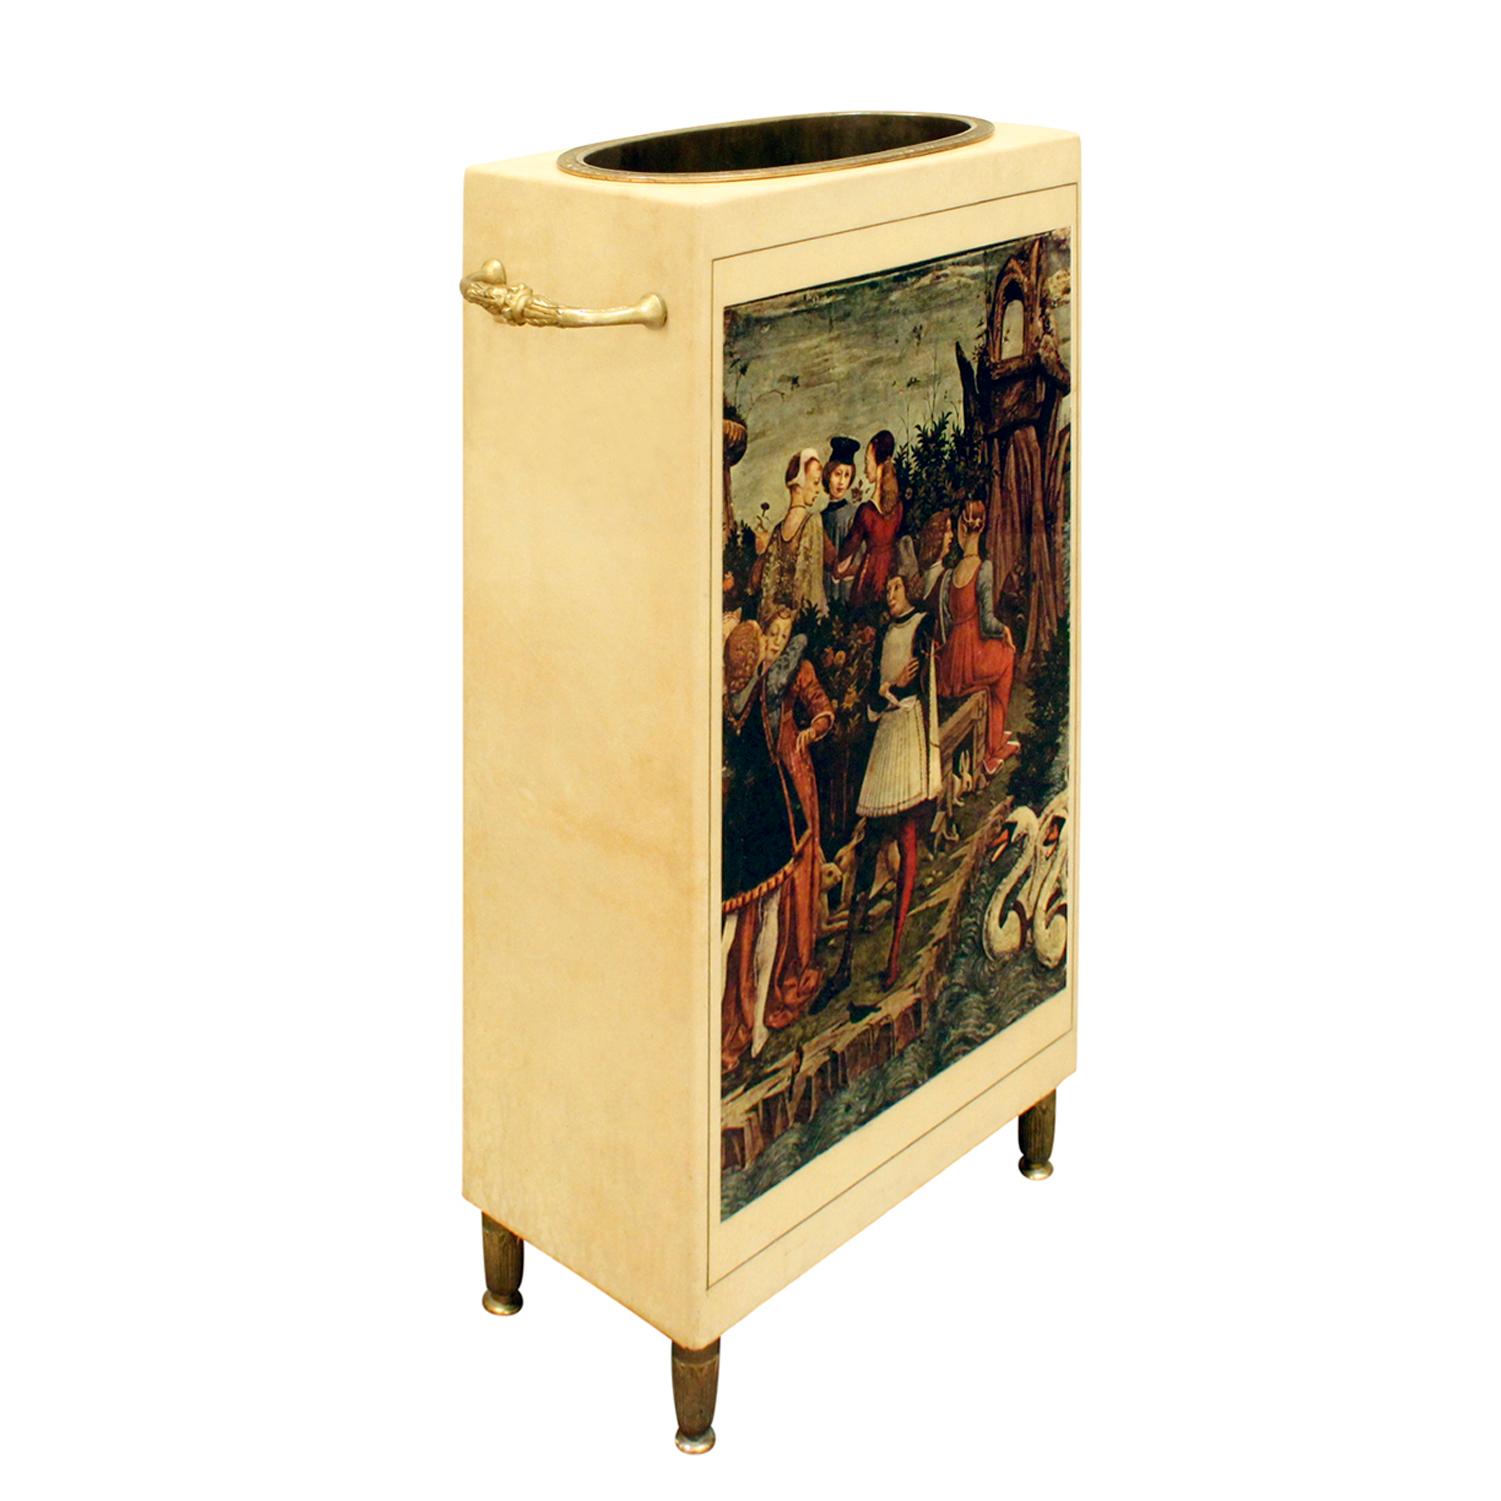 Umbrella stand covered in lacquered goatskin with lithographically printed and hand-colored Renaissance scene and brass hardware by Aldo Tura, Italy, 1970s (signed on bottom). This is a rare and unique piece.